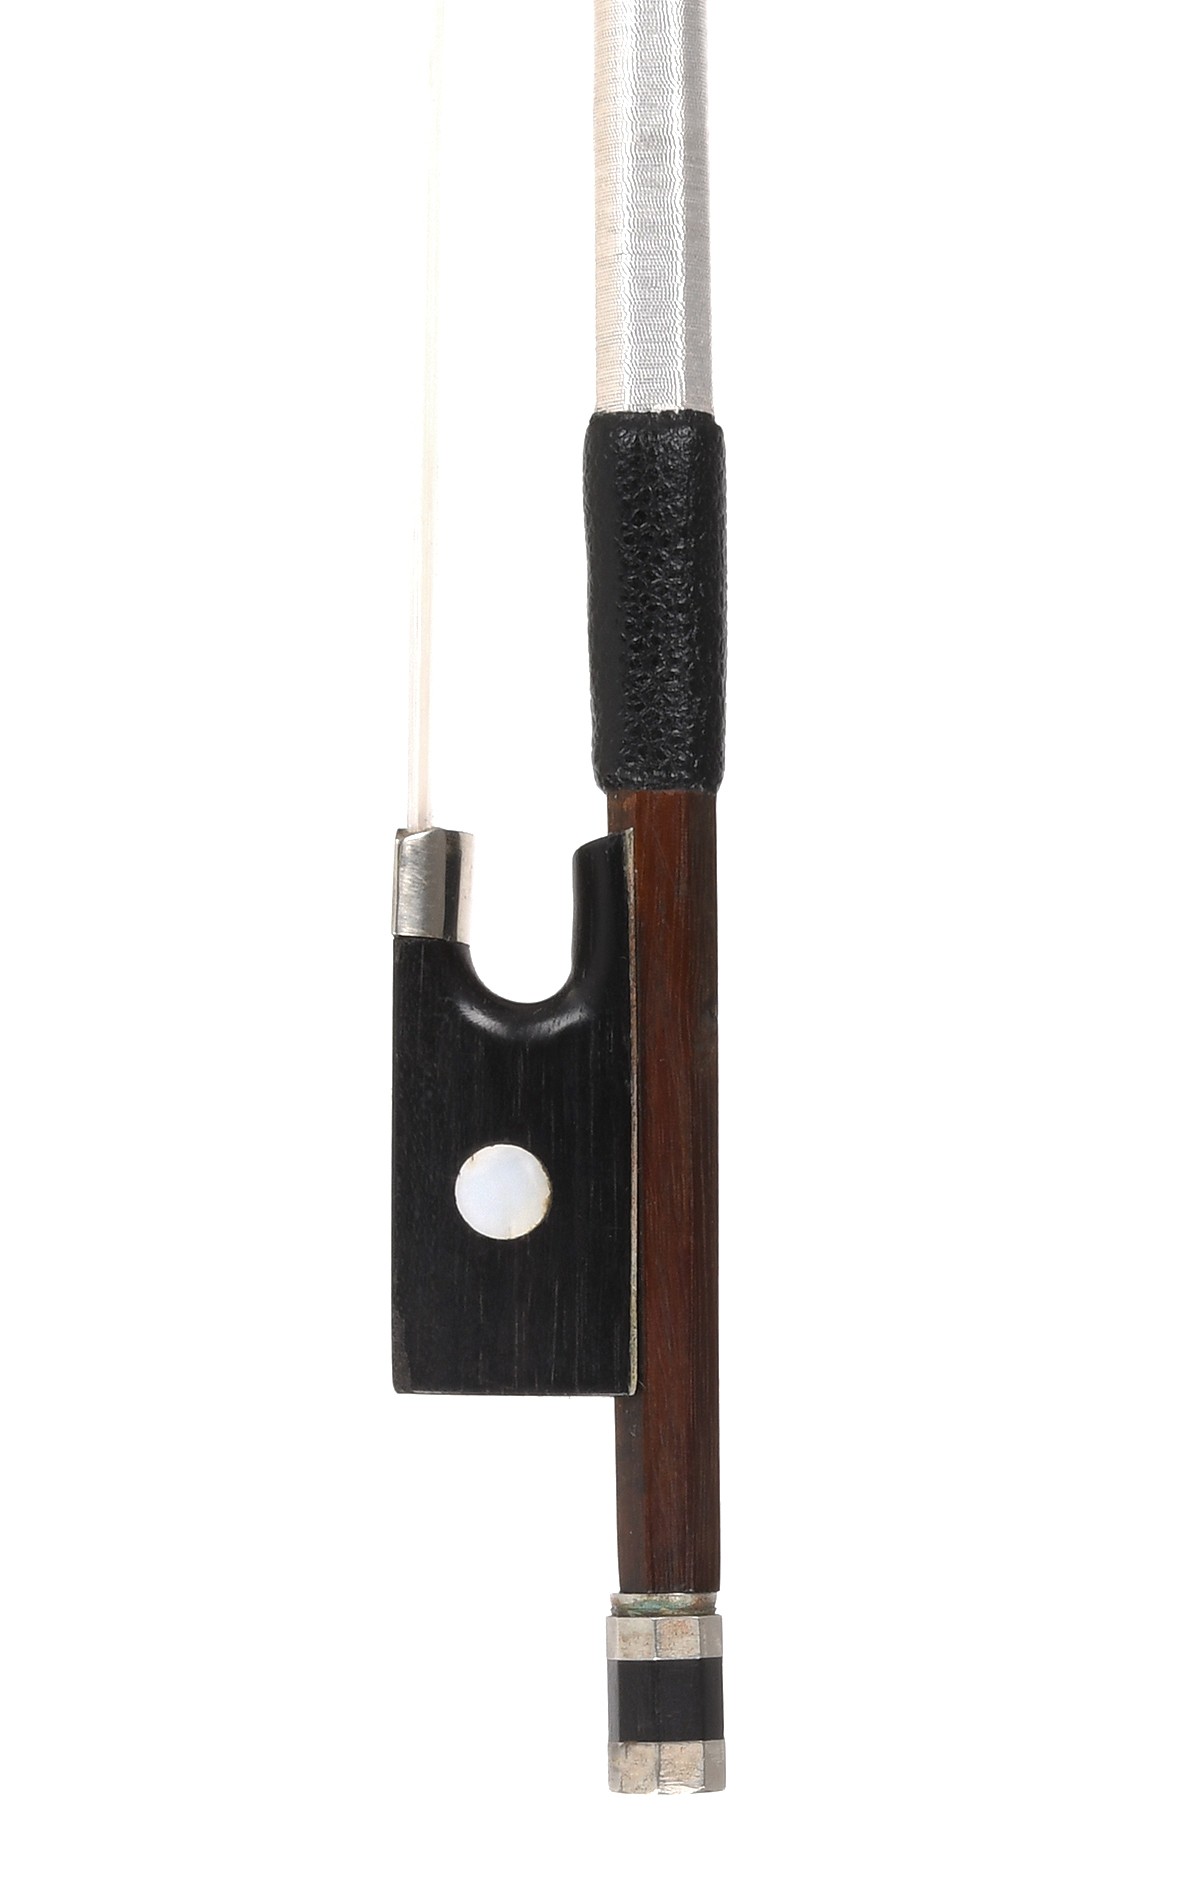 Excellent French 3/4 violin bow, Bazin c.1900